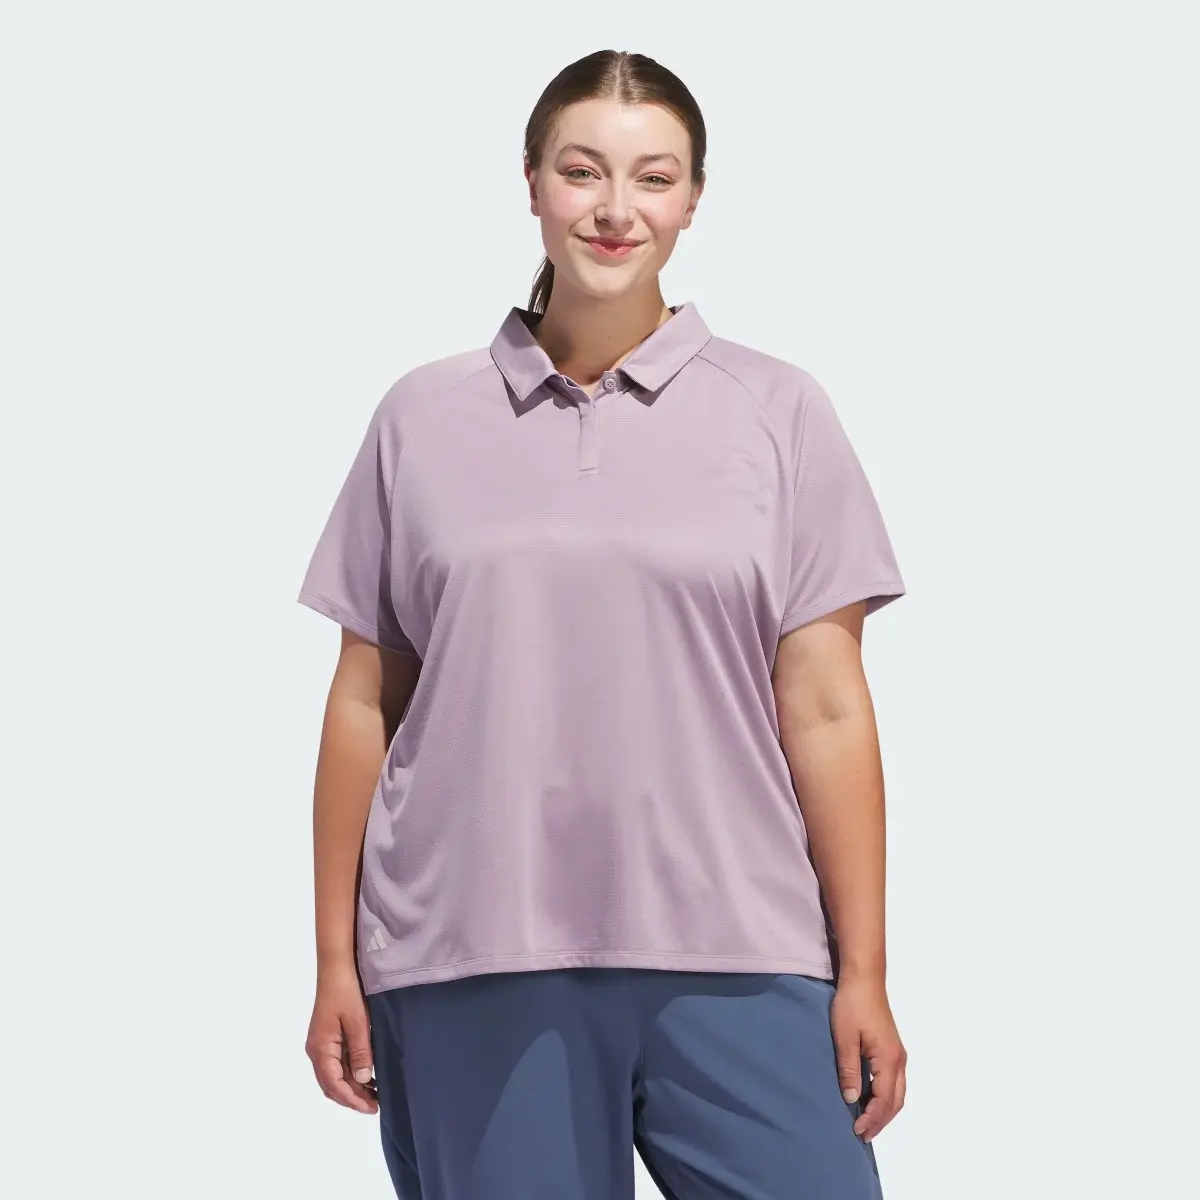 Adidas Polo HEAT.RDY Ultimate365 – Mulher (Plus Size). 2